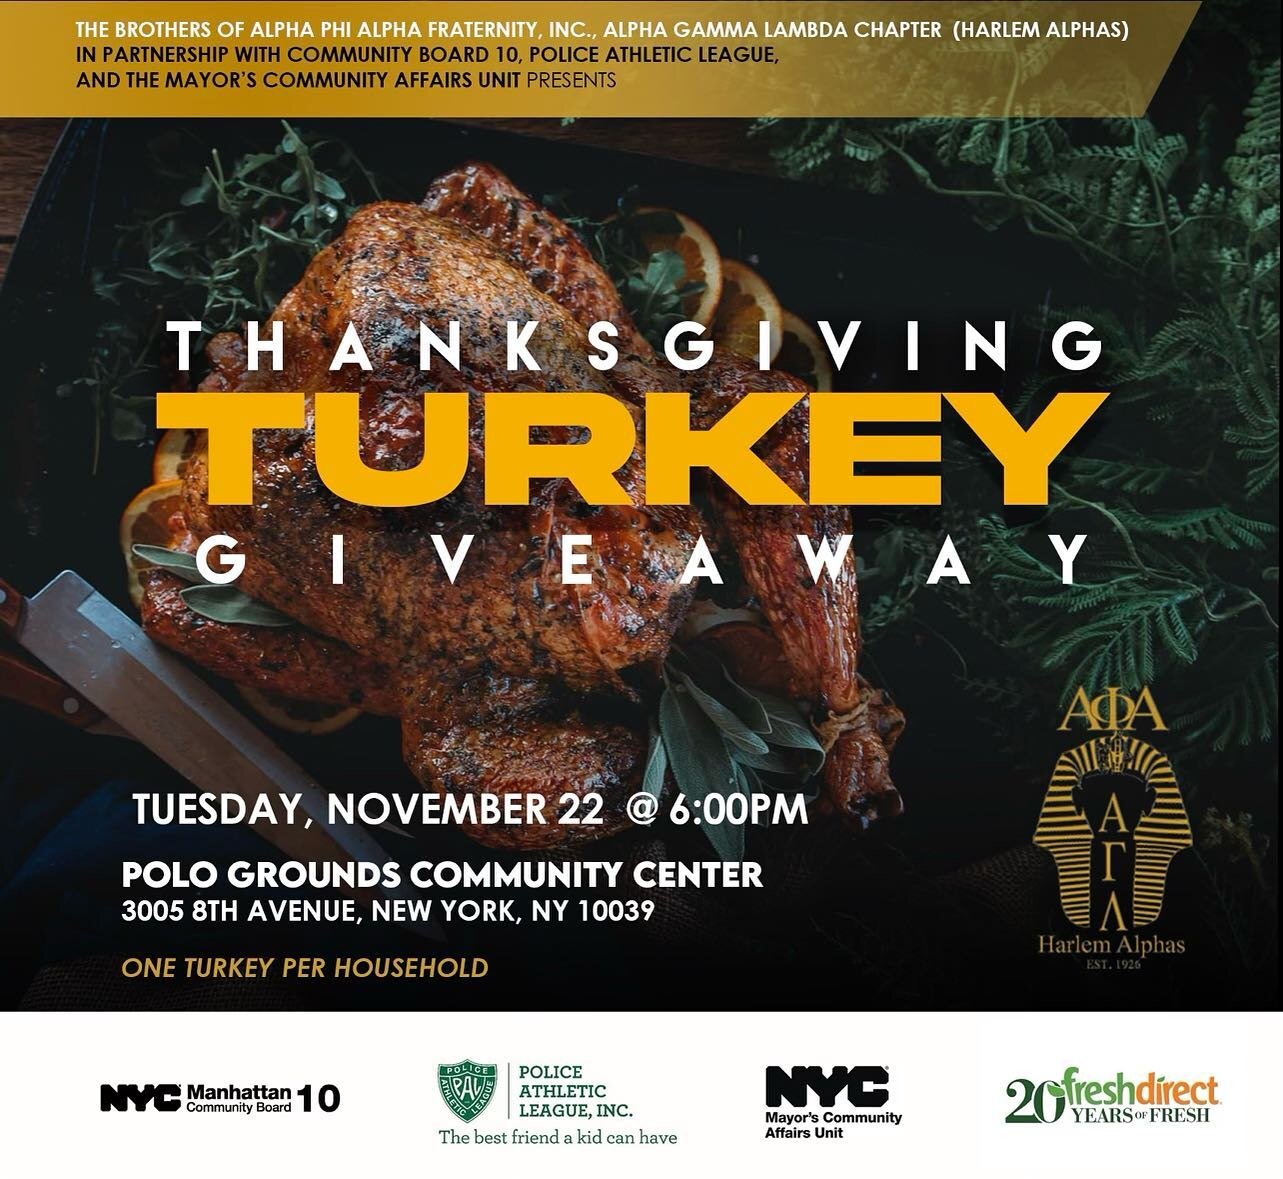 Come out to our Thanksgiving Turkey Giveaway on Tuesday, November 22nd at 6pm. This Turkey Giveaway will be a great event in partnership with Community Board 10, Police Athletic League, and The Mayor&rsquo;s Community Affairs Unit.